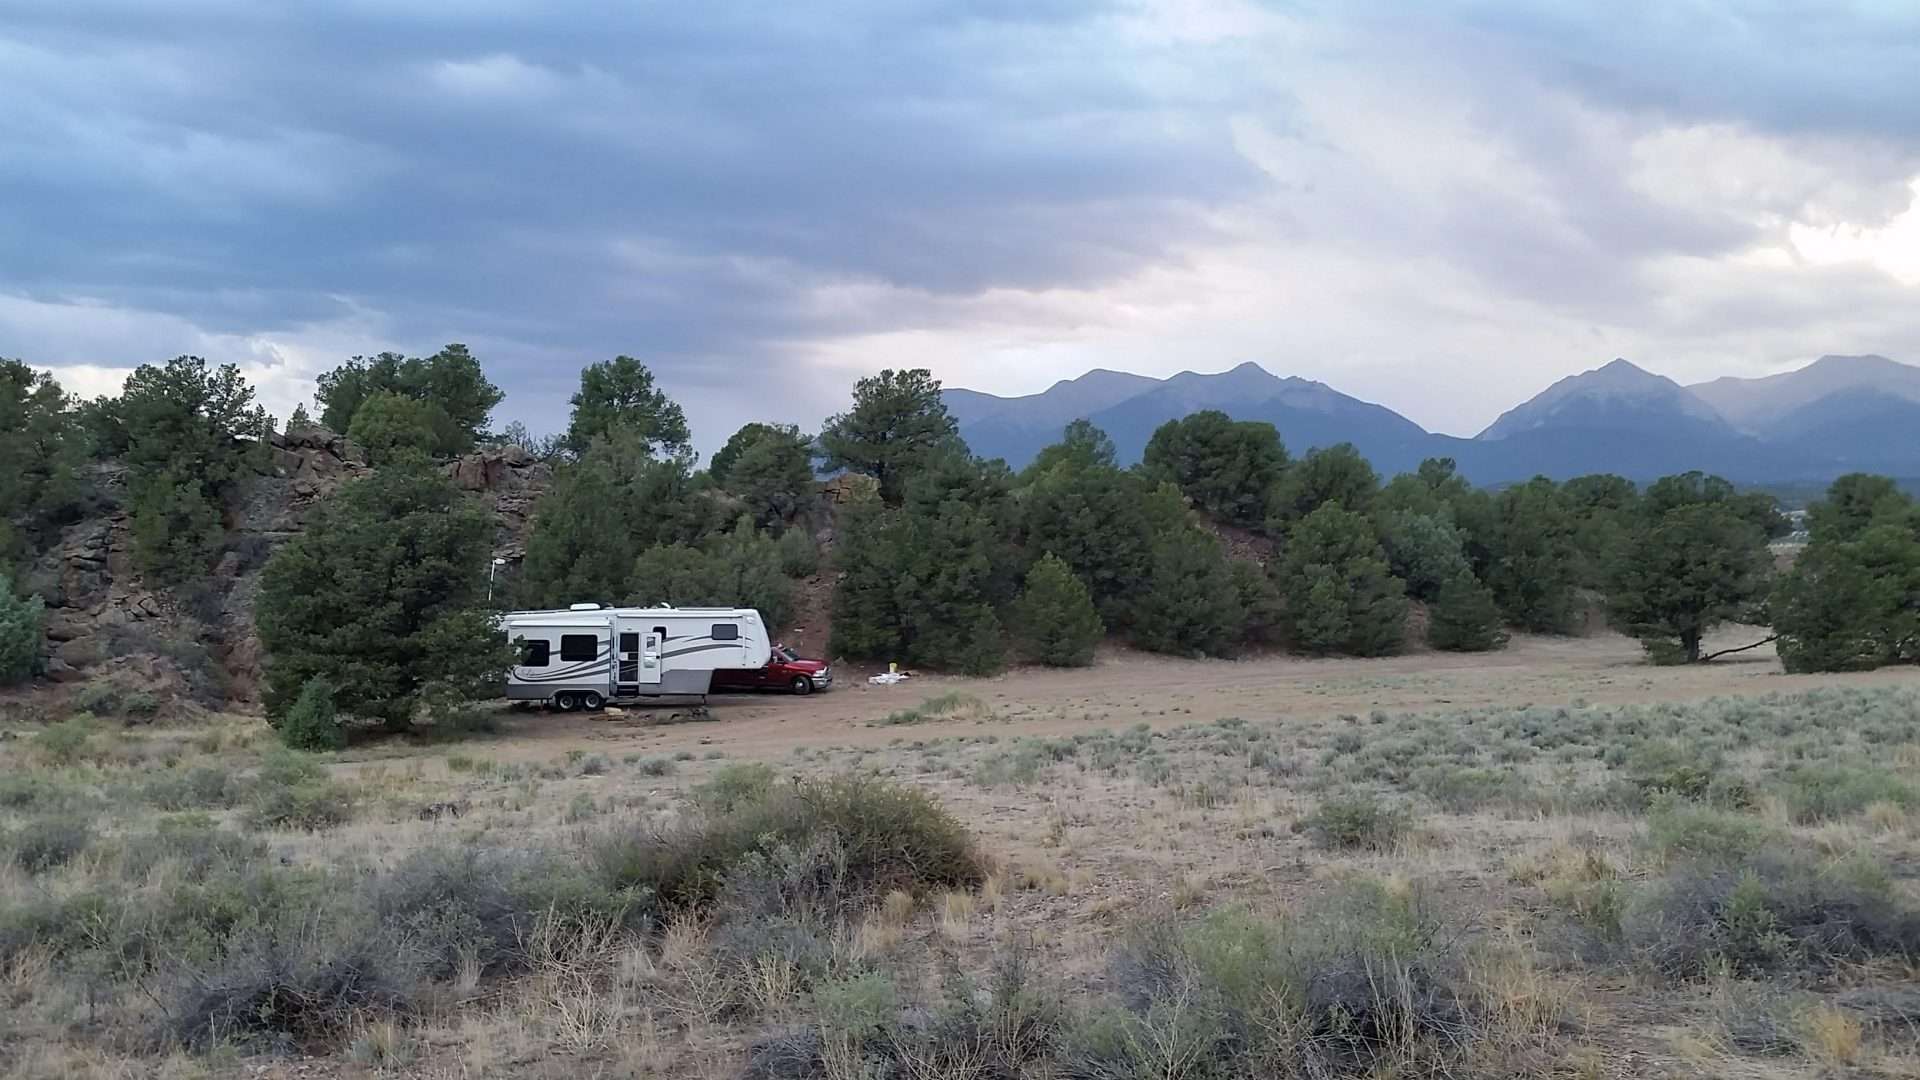 Mortons on the Move truck and fifth wheel parked in isolated camping spot by mountains.